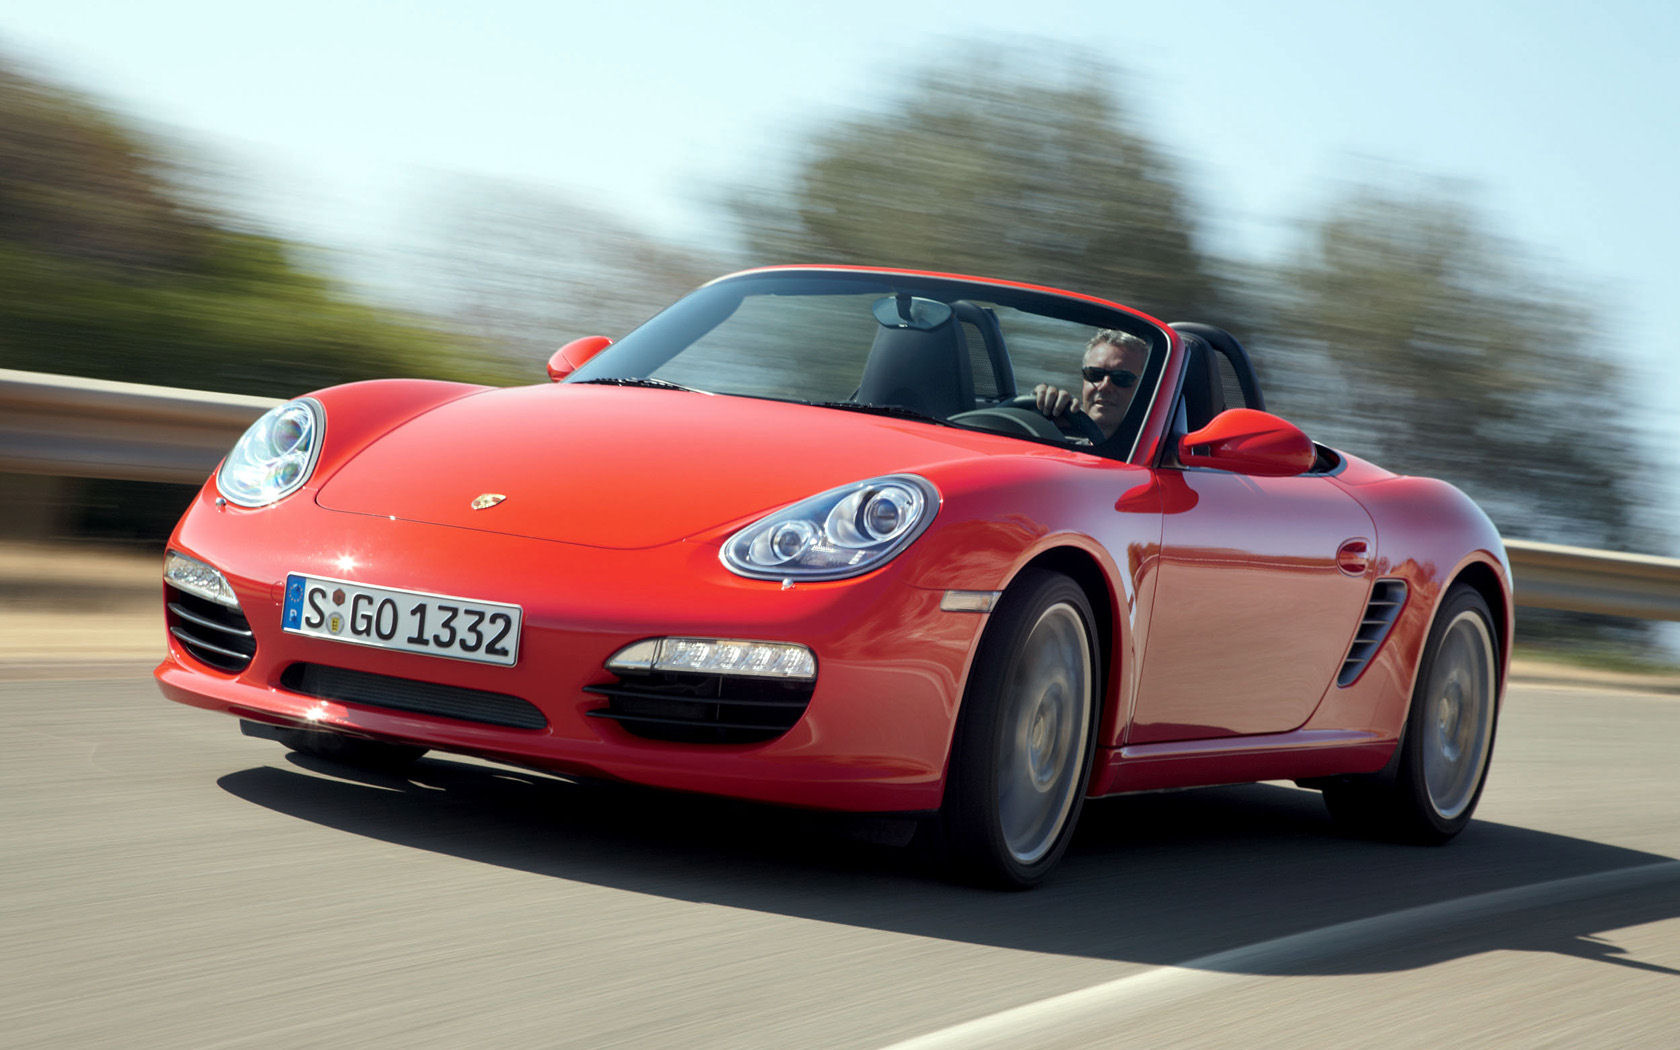 Porsche Porsche Boxster Porsche Boxster Desktop Wallpapers 1680x1050